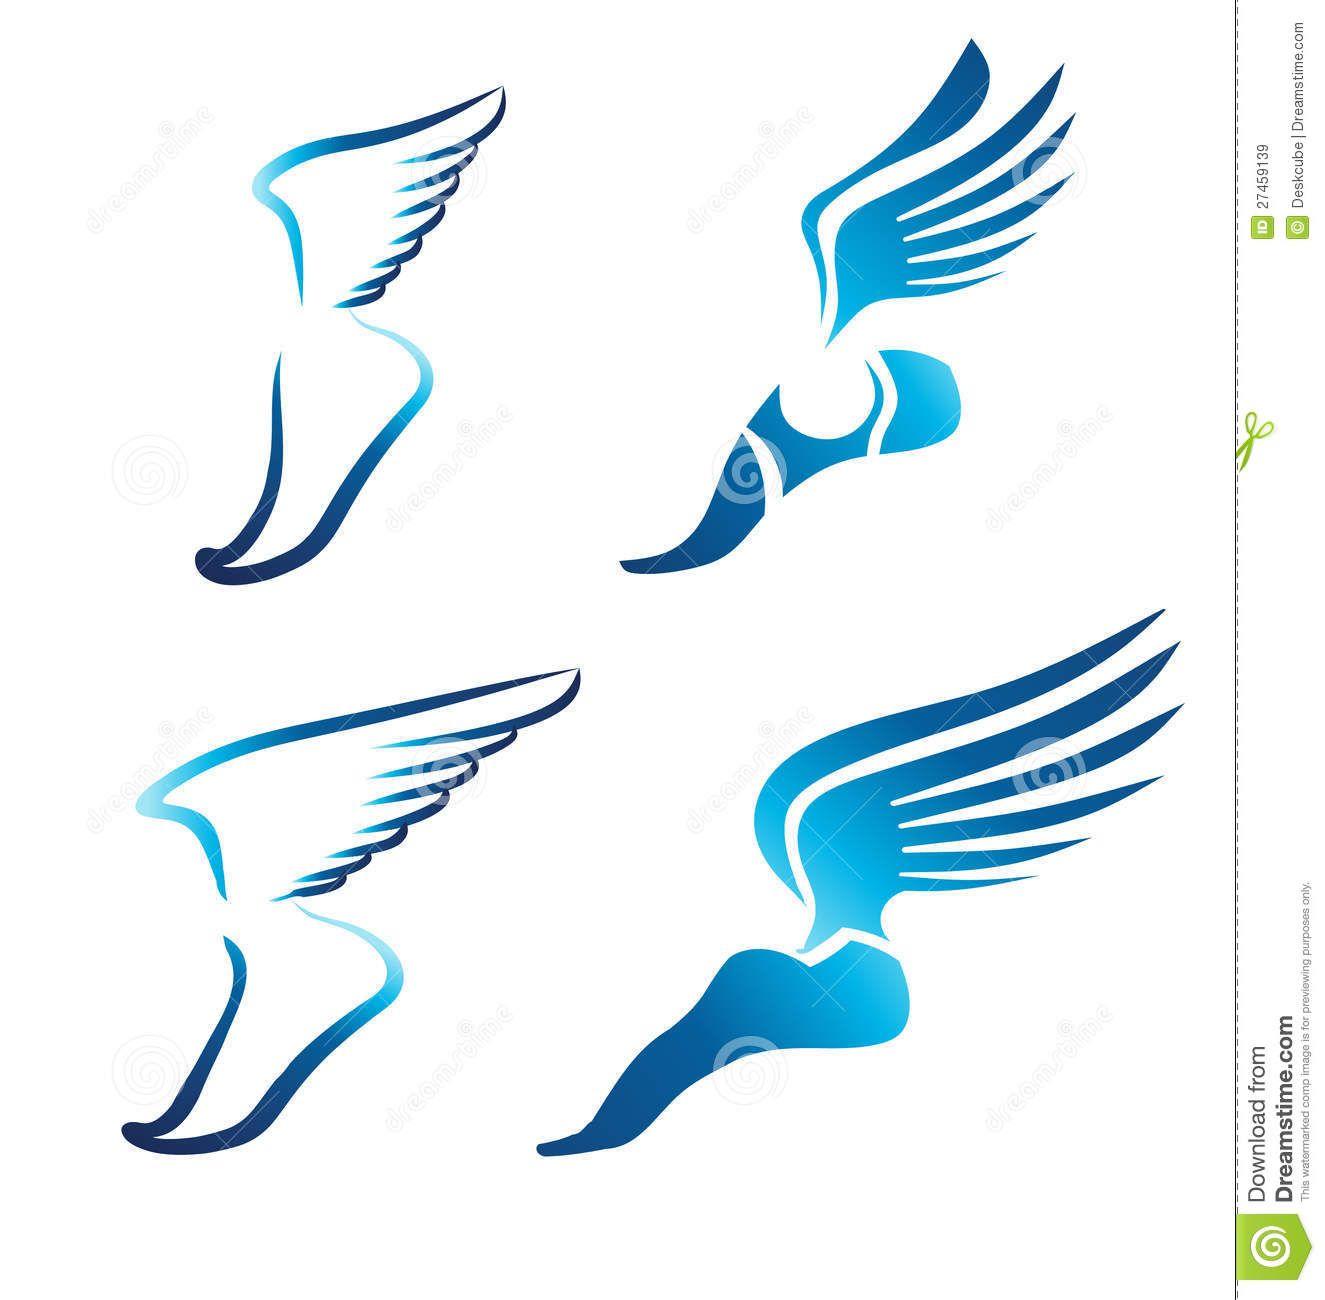 Who Has a Wing and a Foot Logo - Modern Swoosh Foot with Wing Logo Design. Abstract Graphics. Logo